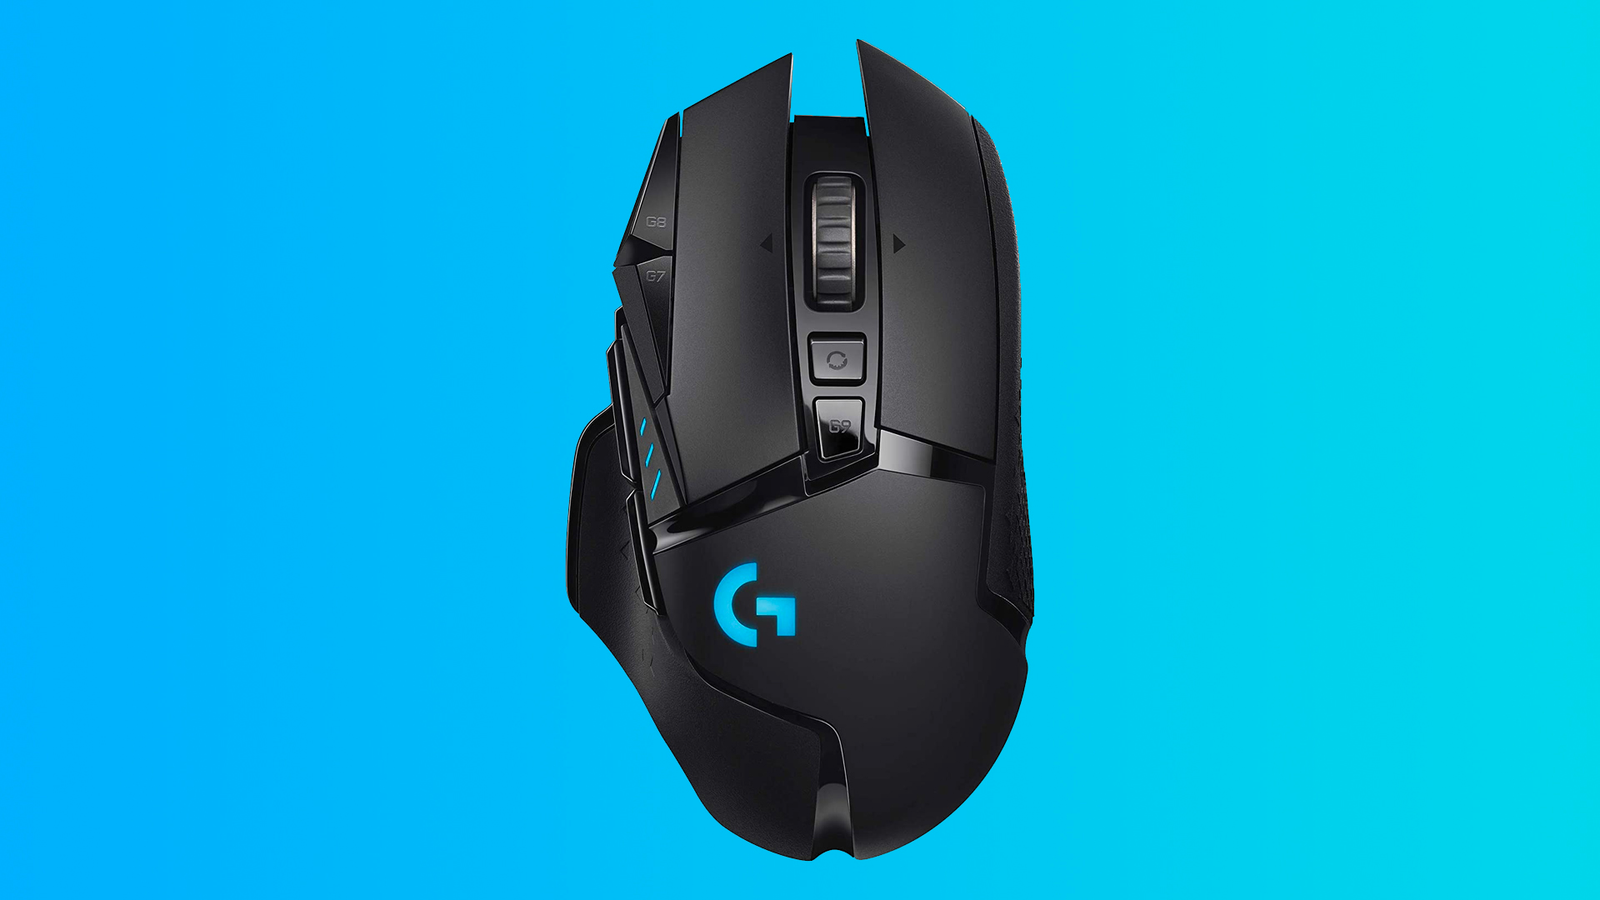 Nab the powerful Logitech G502 Lightspeed for just £60 from